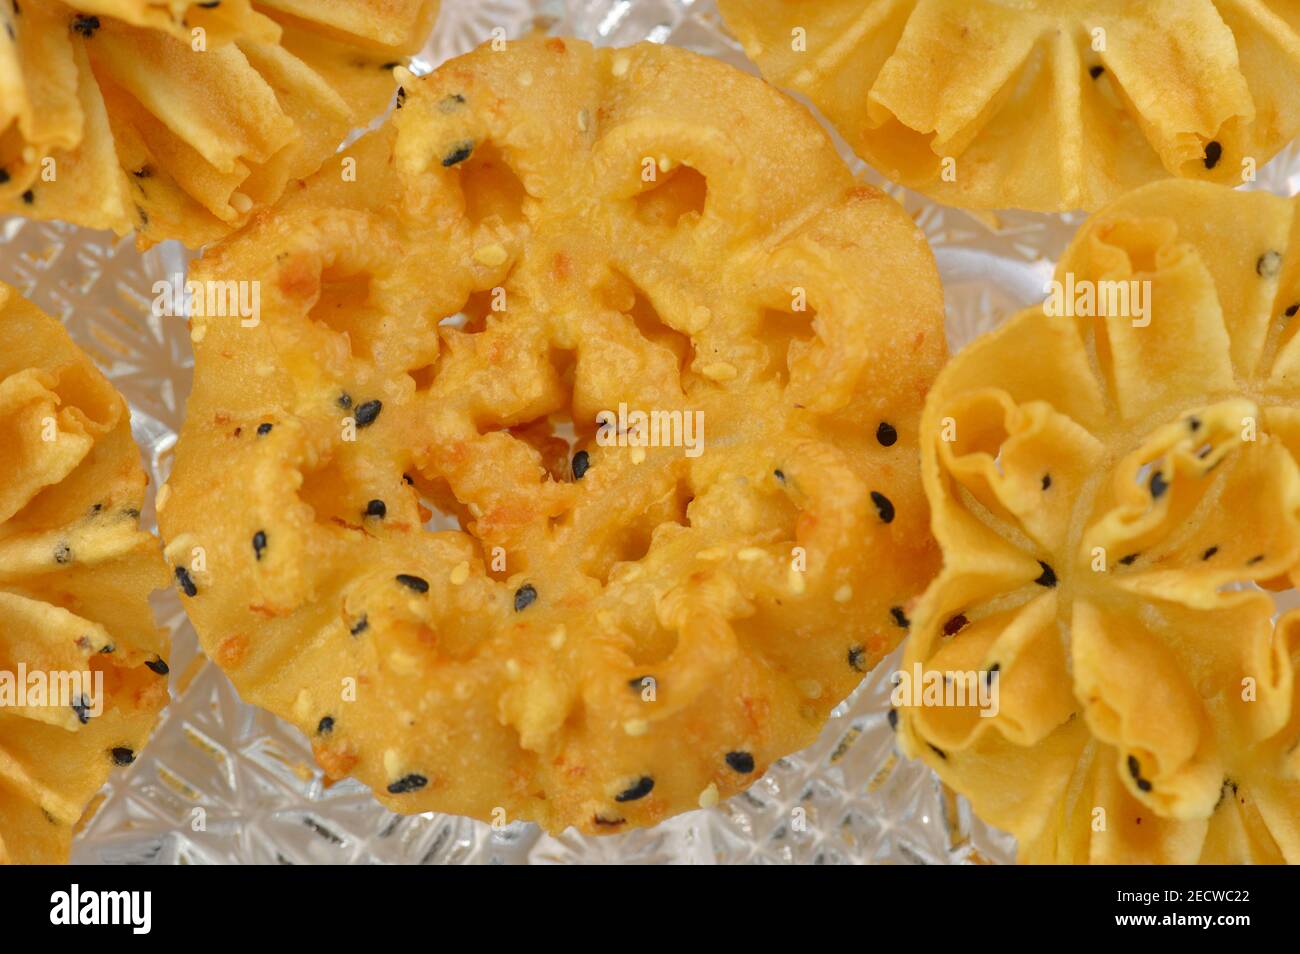 Back view of a Kuih Rose or rosette cookie, a popular festive treat o celebrate Chinese New Year in Singapore and Malaysia Stock Photo